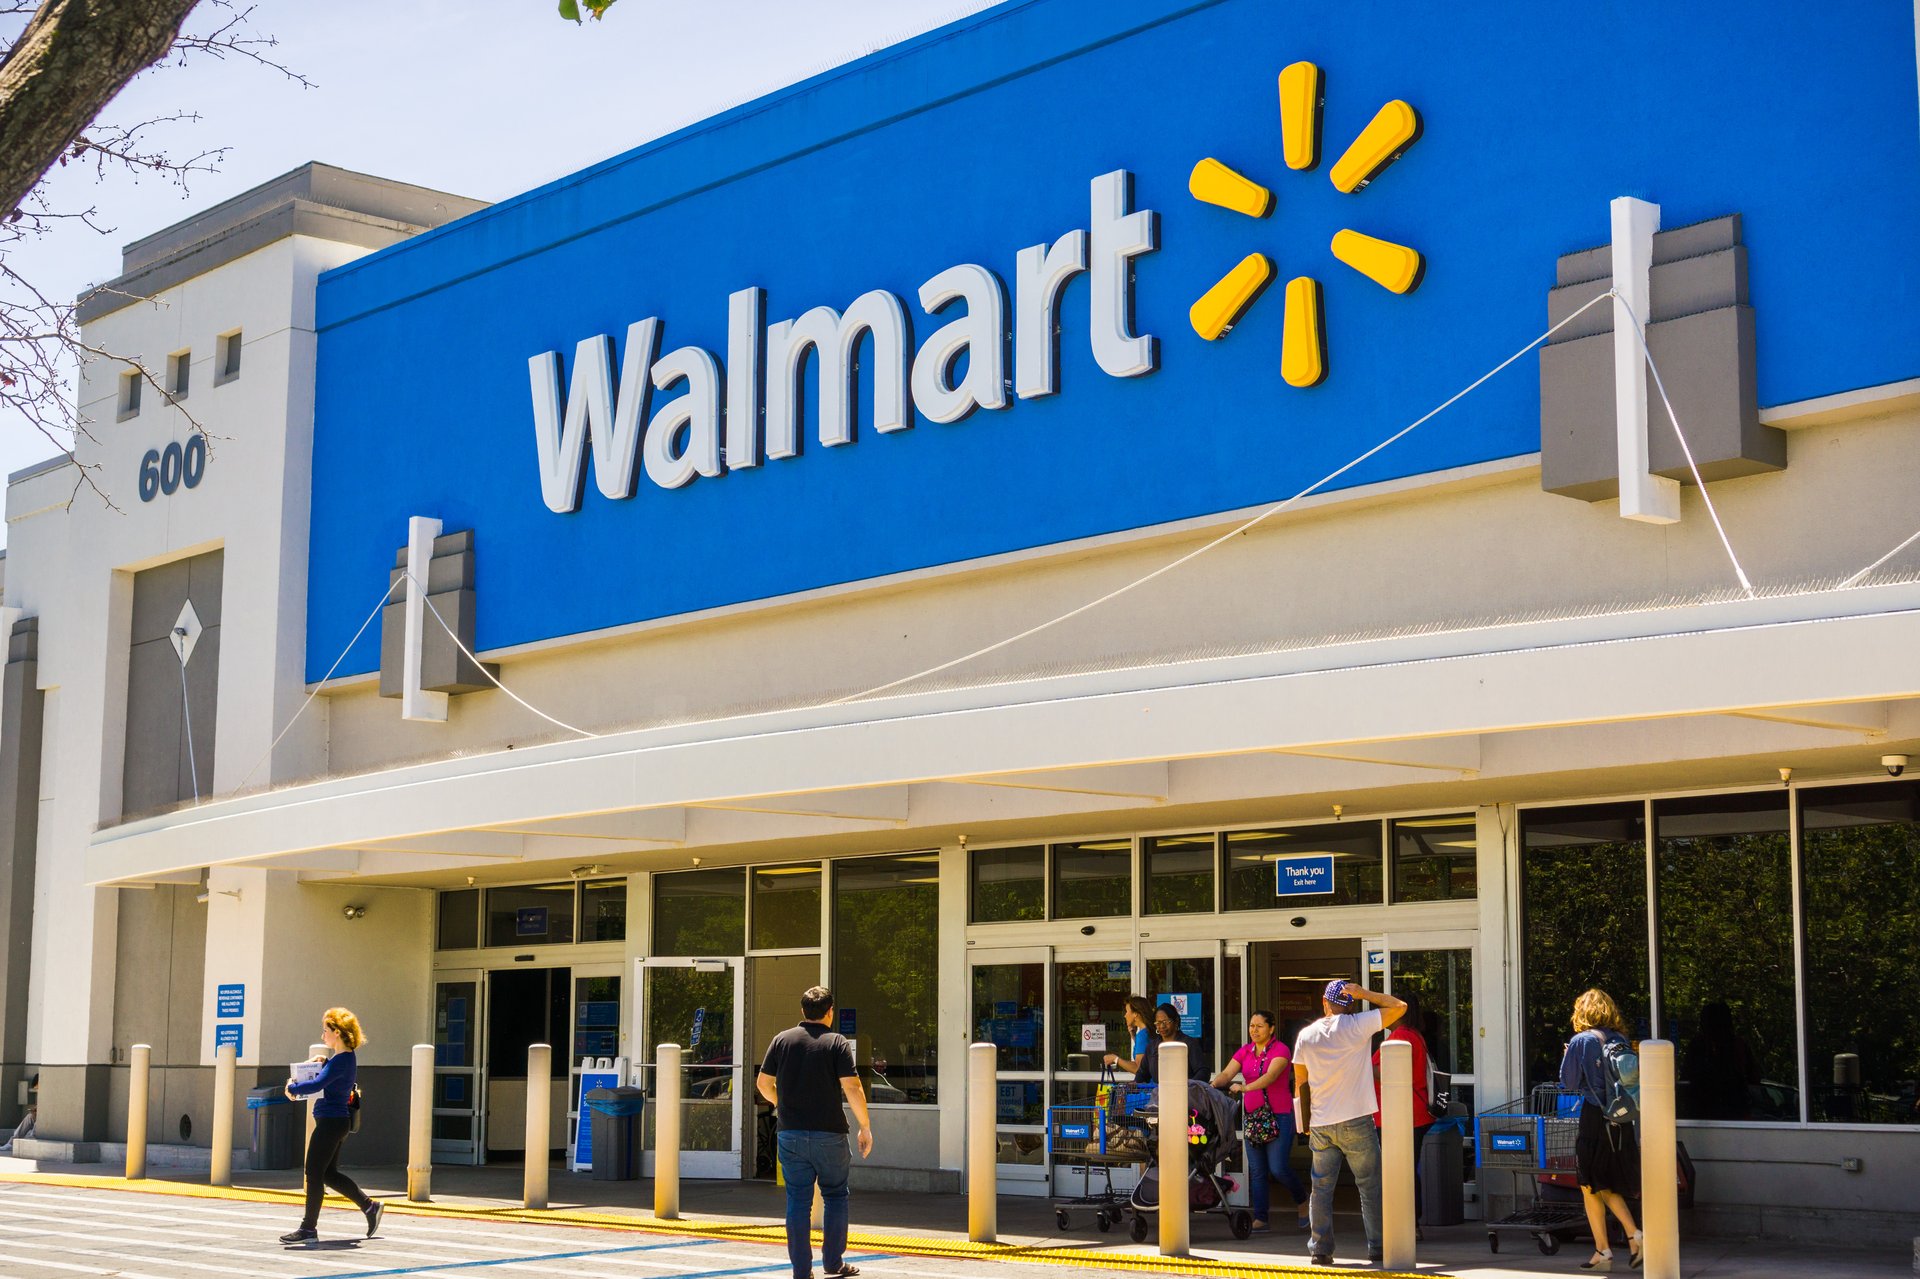 Walmart TV Return Policy In 2022 [All You Need To Know]